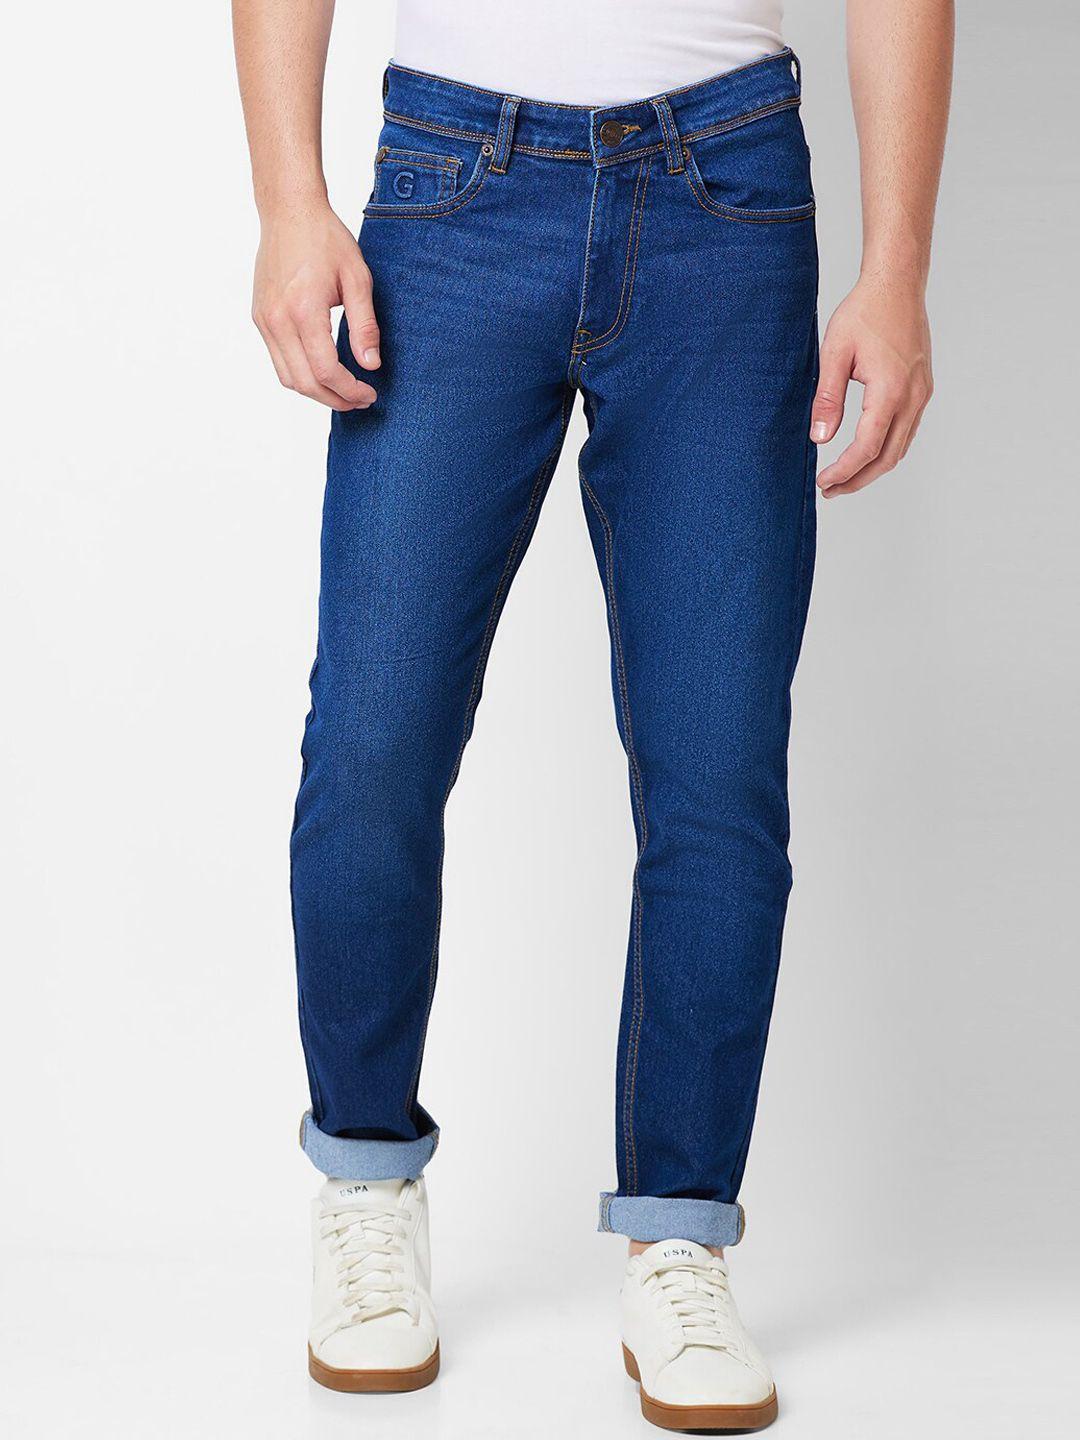 giordano men slim fit light fade stretchable jeans